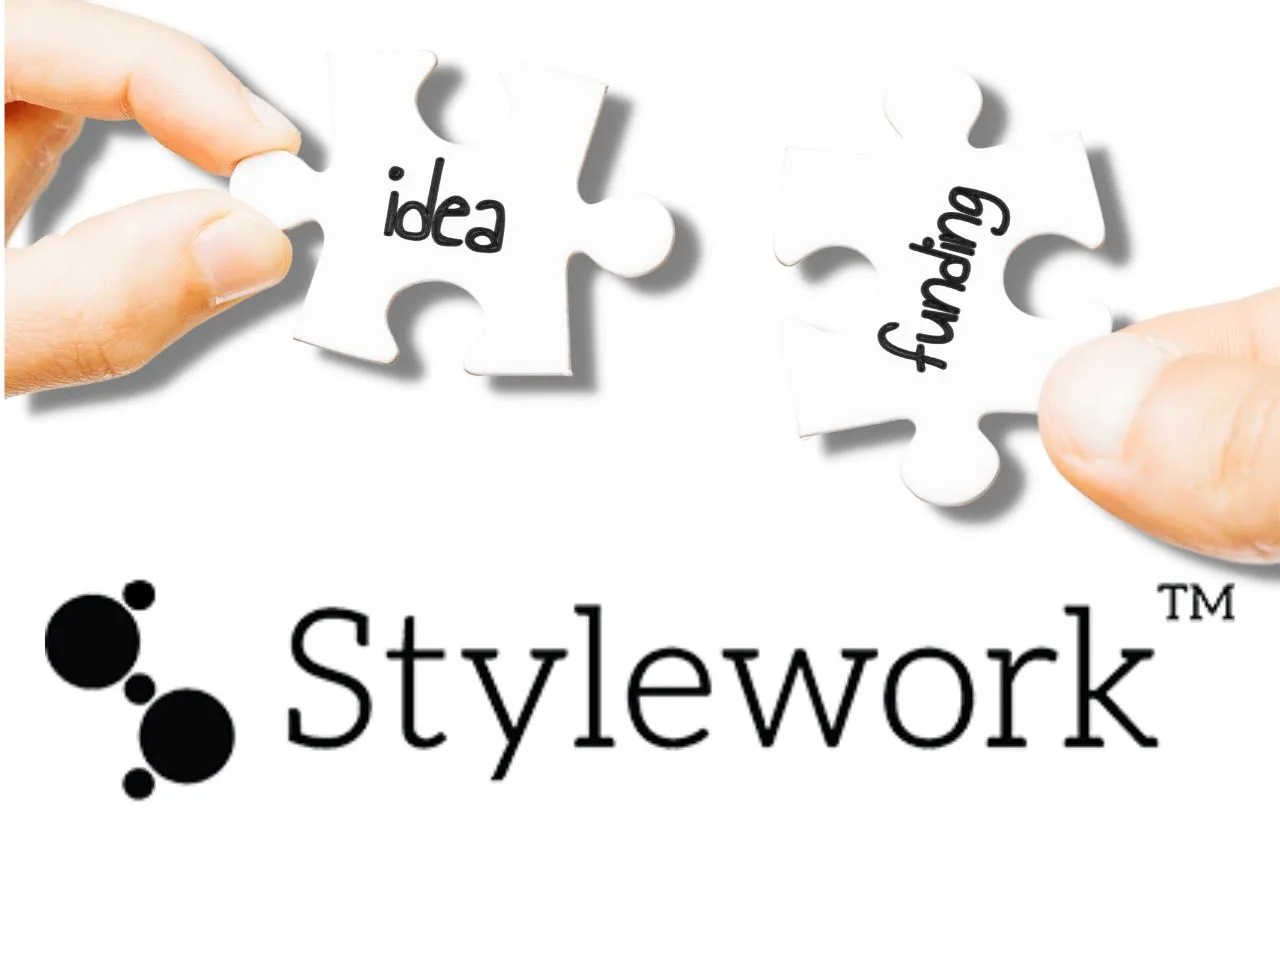 Coworking Marketplace Stylework Series A1 Round Funding